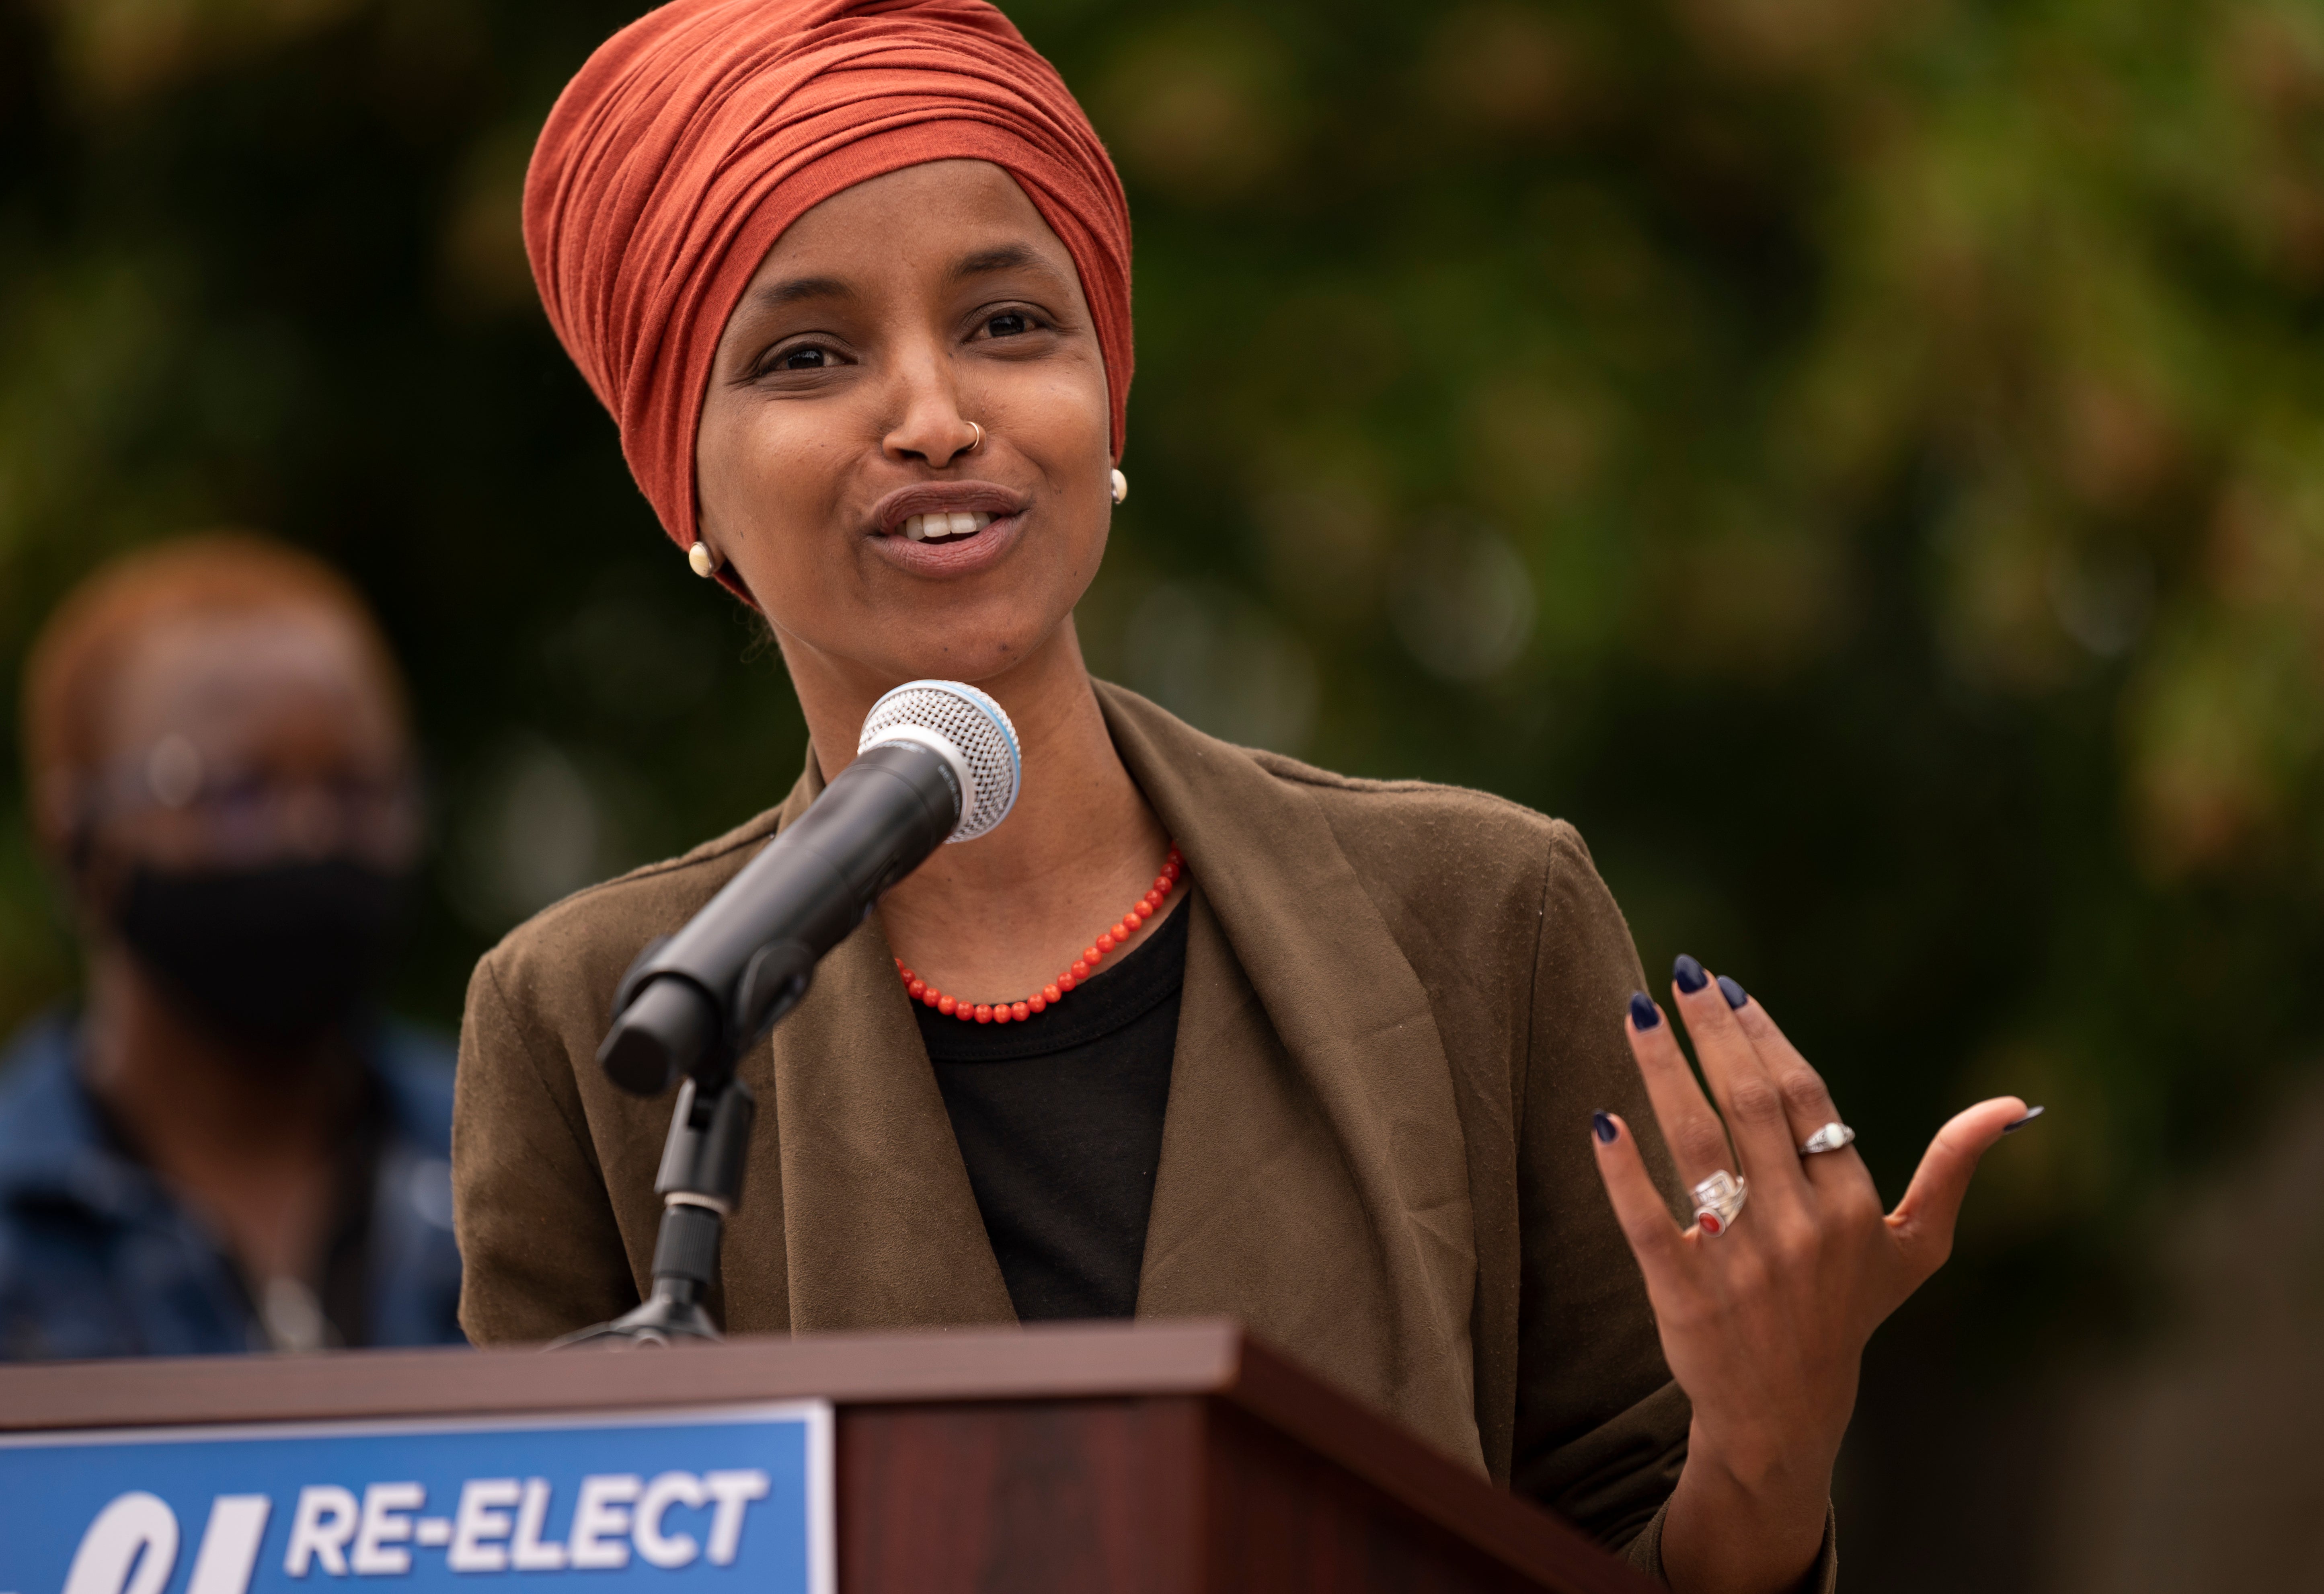 Ilhan Omar was born in Somalia and became a US citizen in 2000